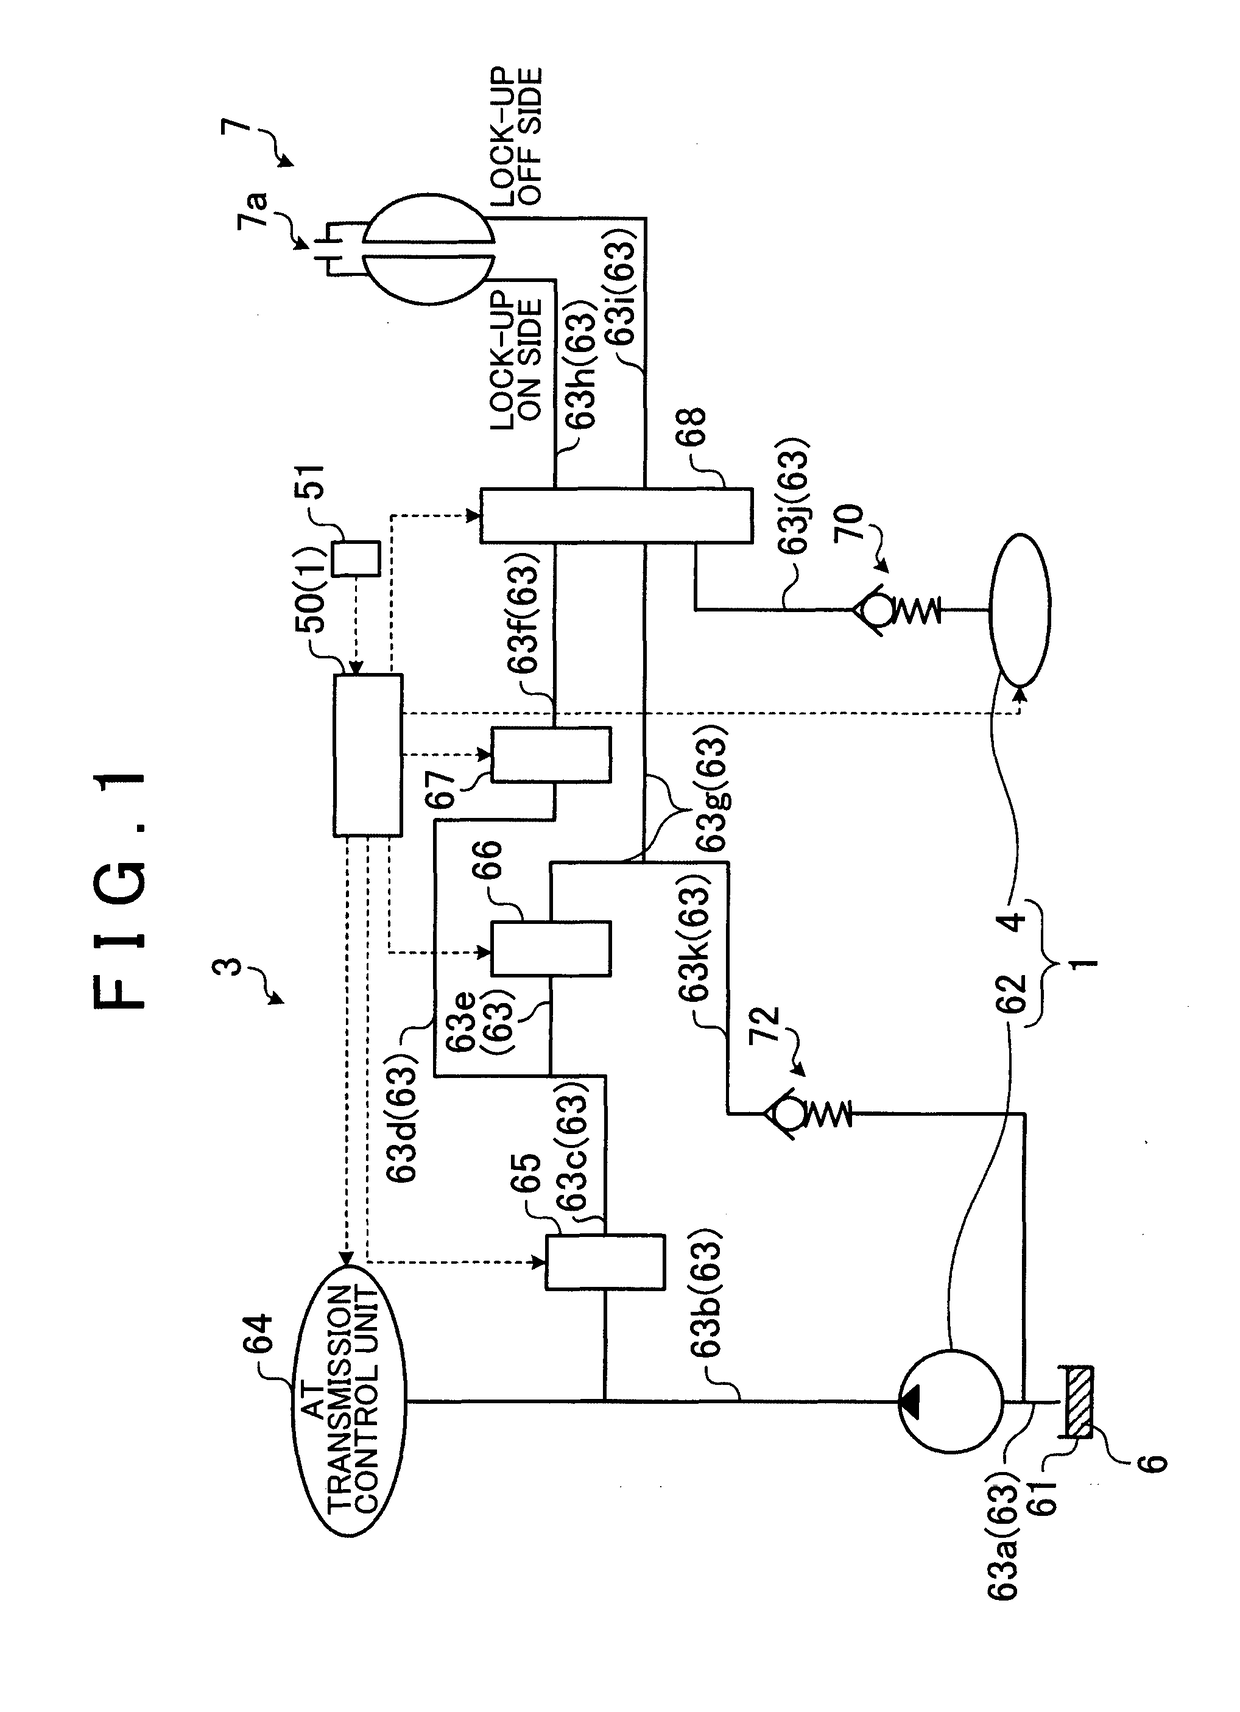 Lubrication control device for transmission